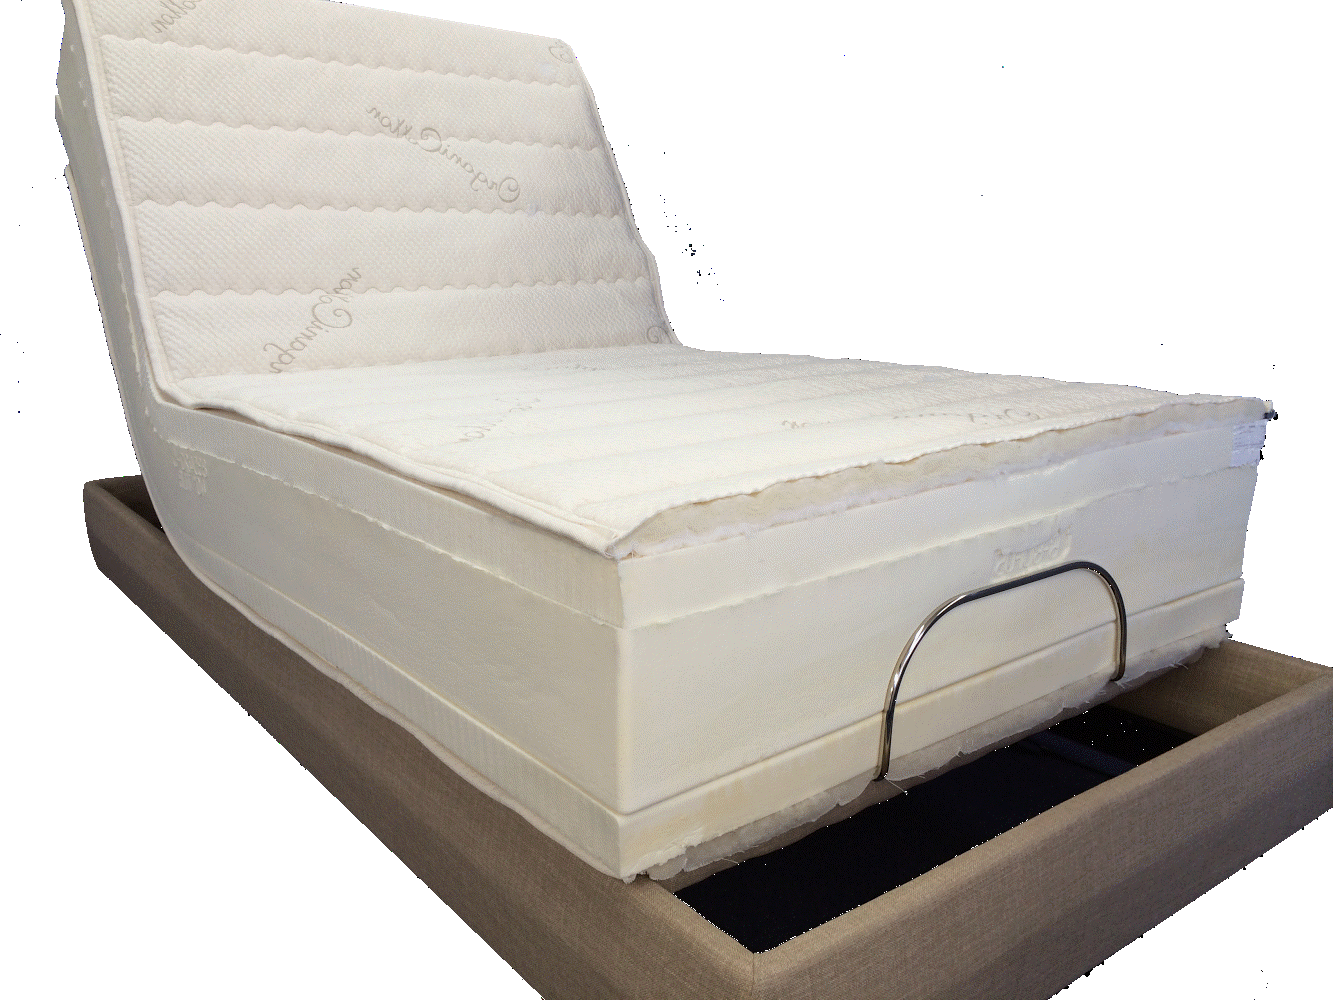 latex adjustable bed mattress innerspring coil sun city are memory foam highest ratings and rated for electric adjustablebeds